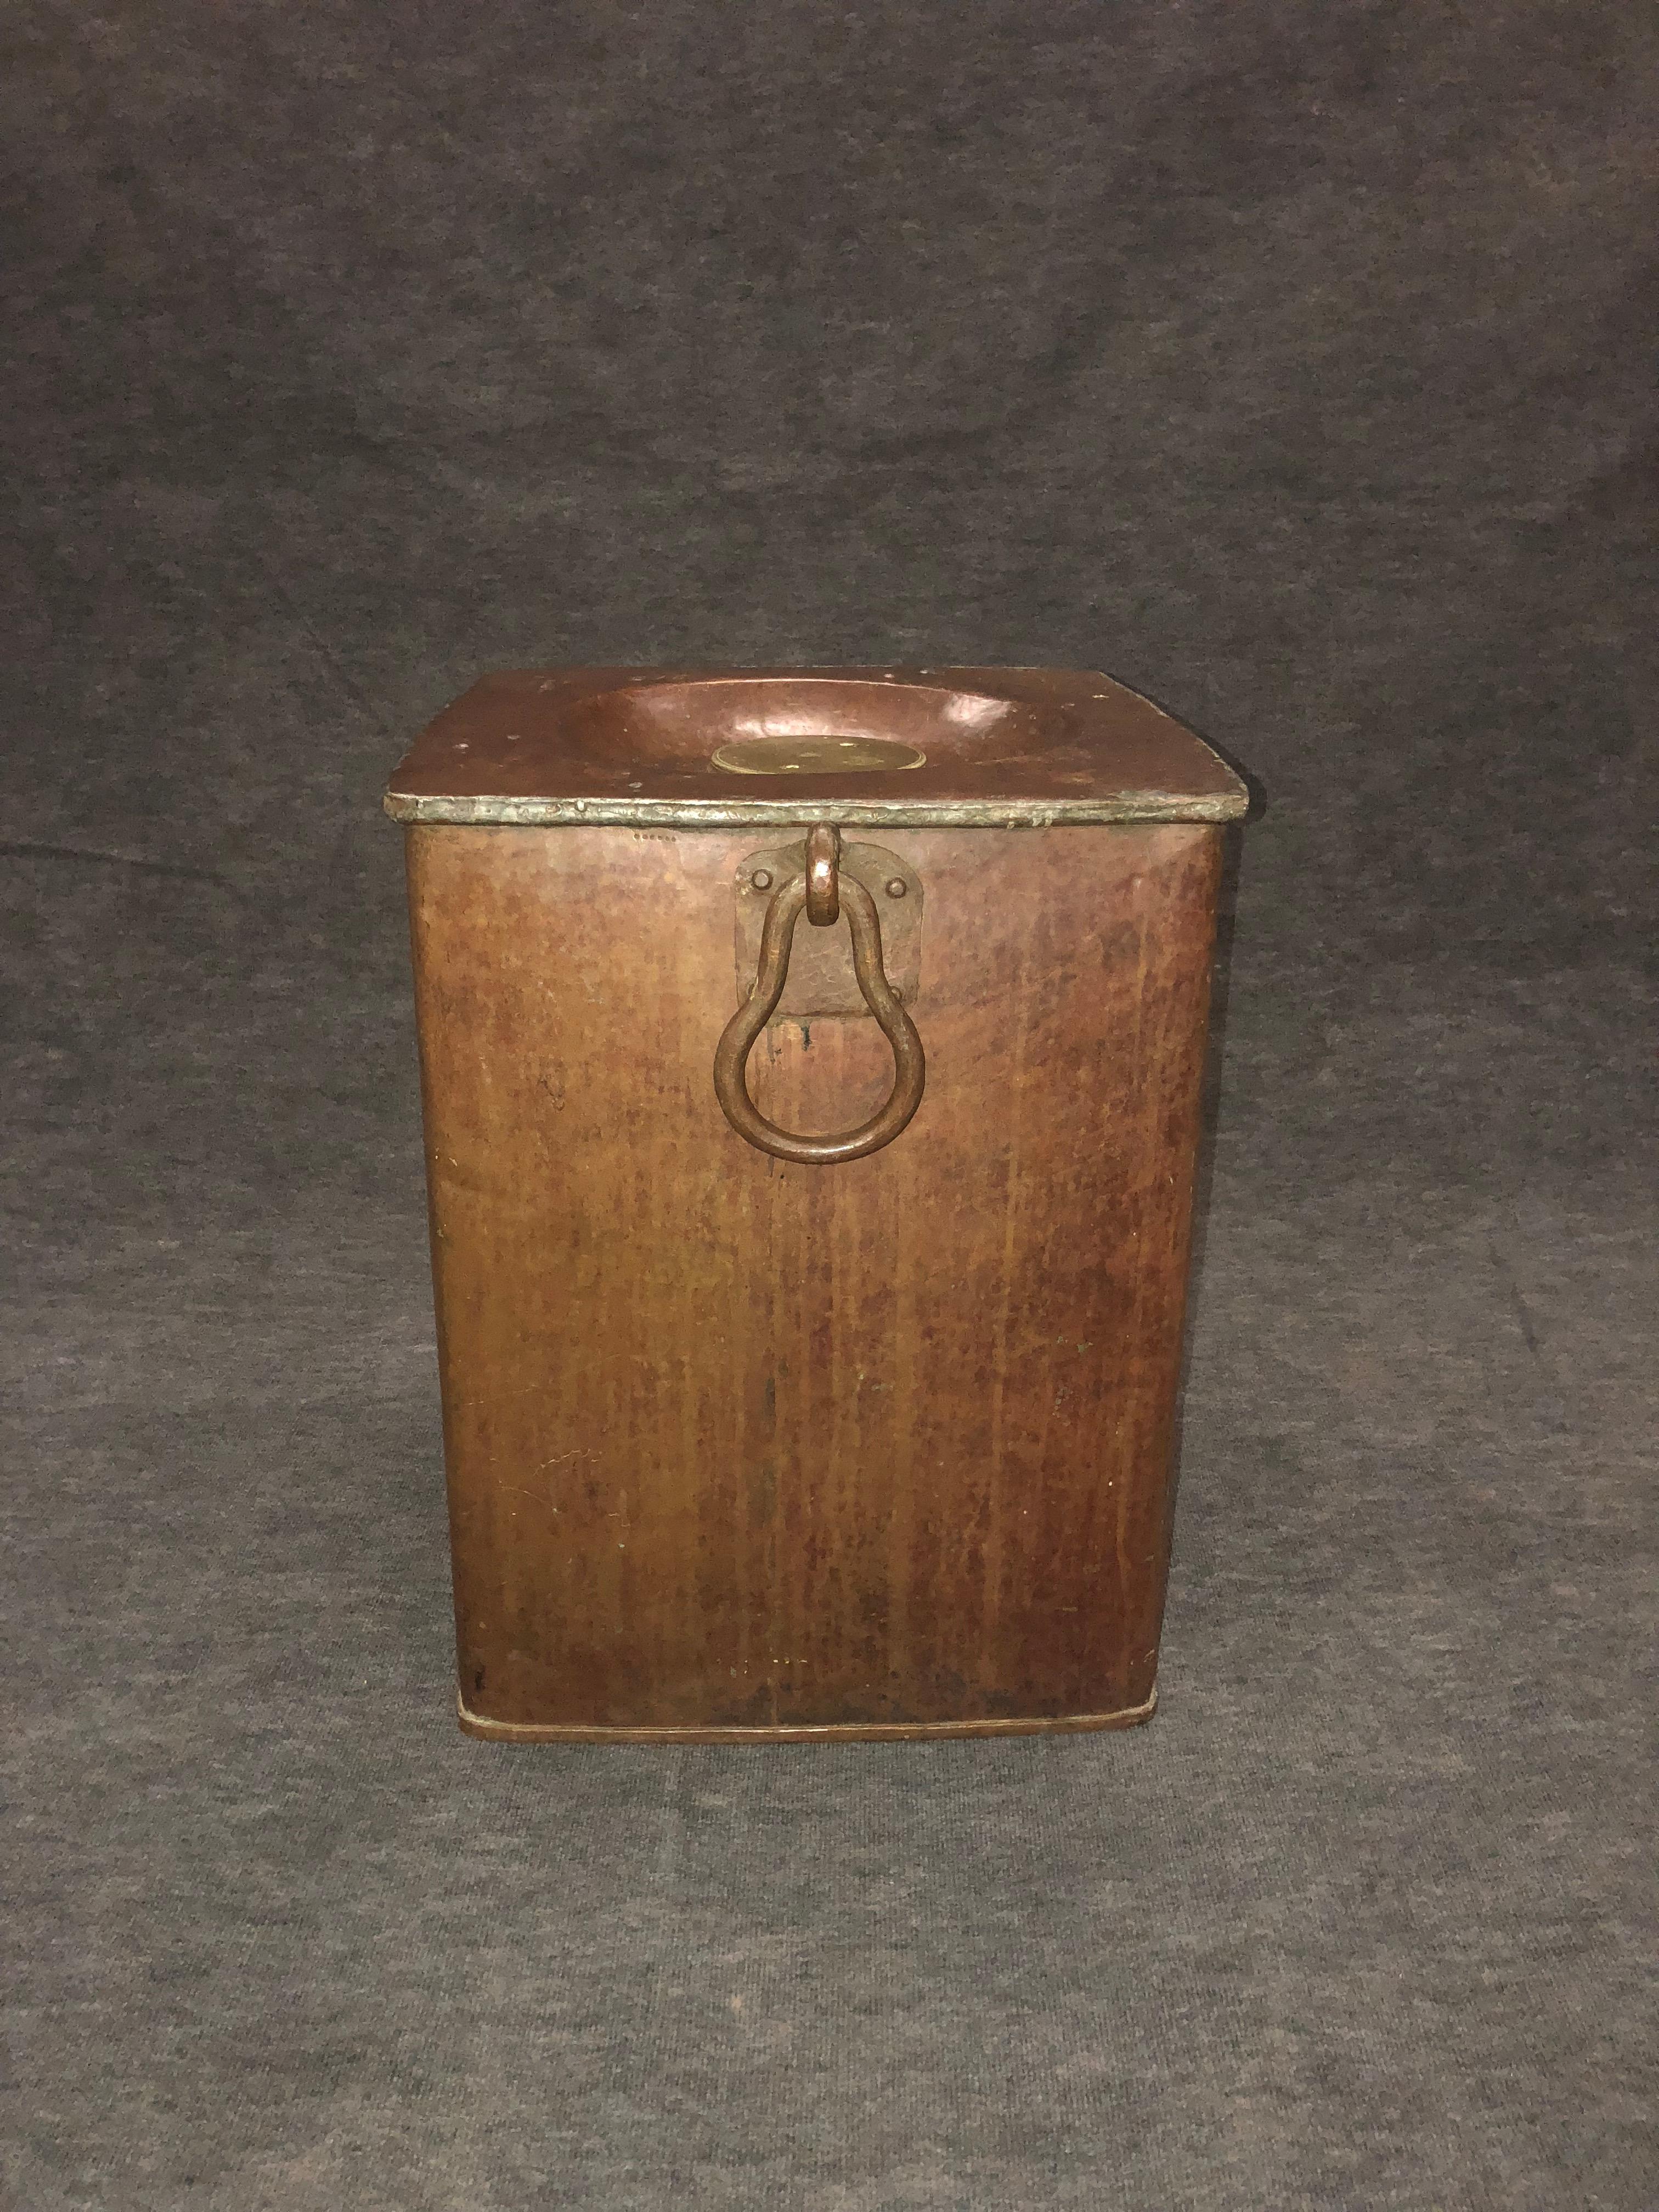 
Rare and unusually large sized copper tank/container used for the transport of animal/vegetable oil, 
later kerosene for fueling lighthouses. 
Marks on it: 1834 SLD three crown copper hallmark (Sweden)
and manually inscribed/scratched number